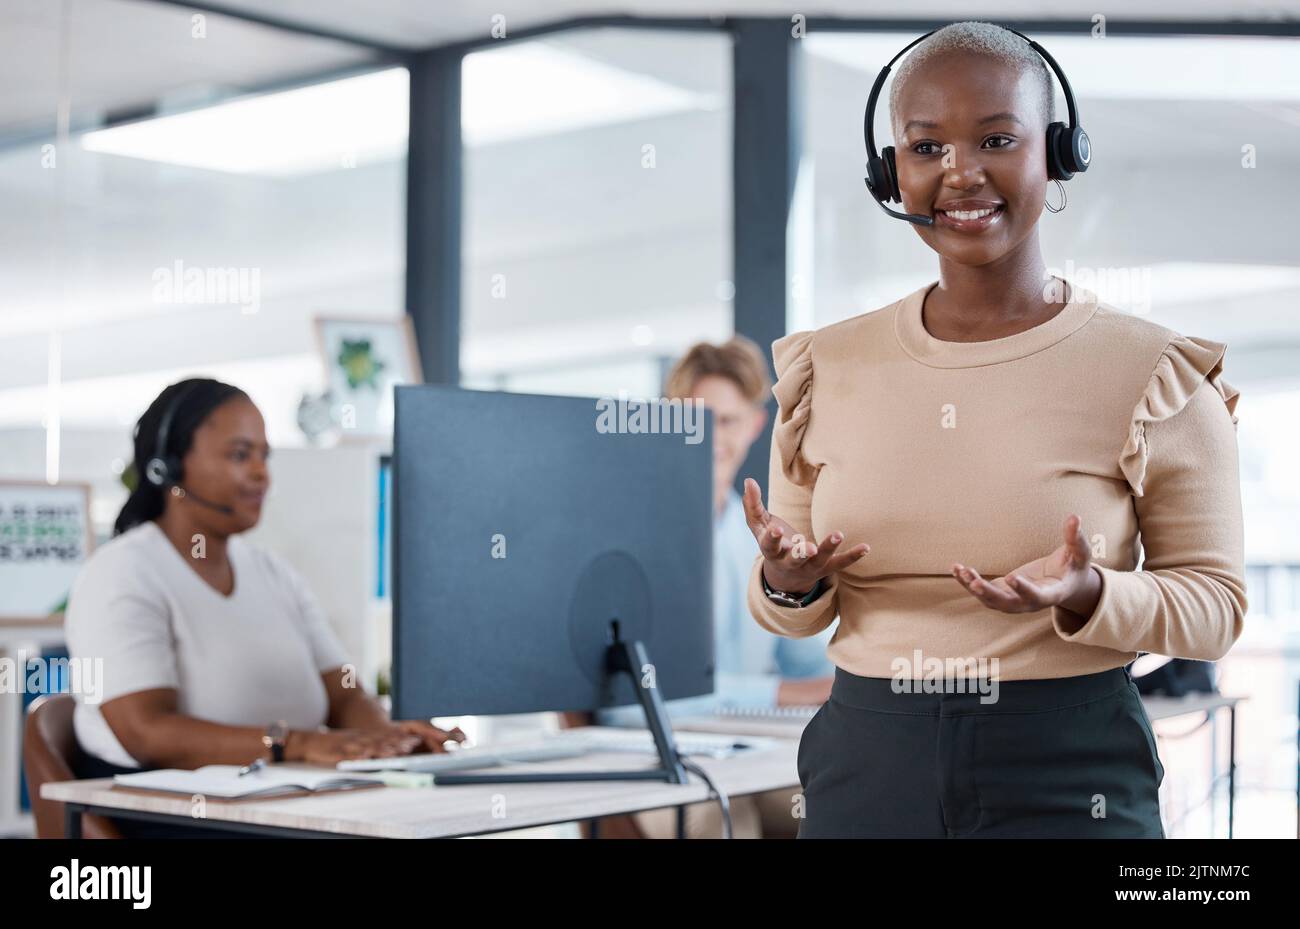 Crm, woman and customer support contact us consultant talking on a customer phone consultation. Happy internet call center employee with headset Stock Photo